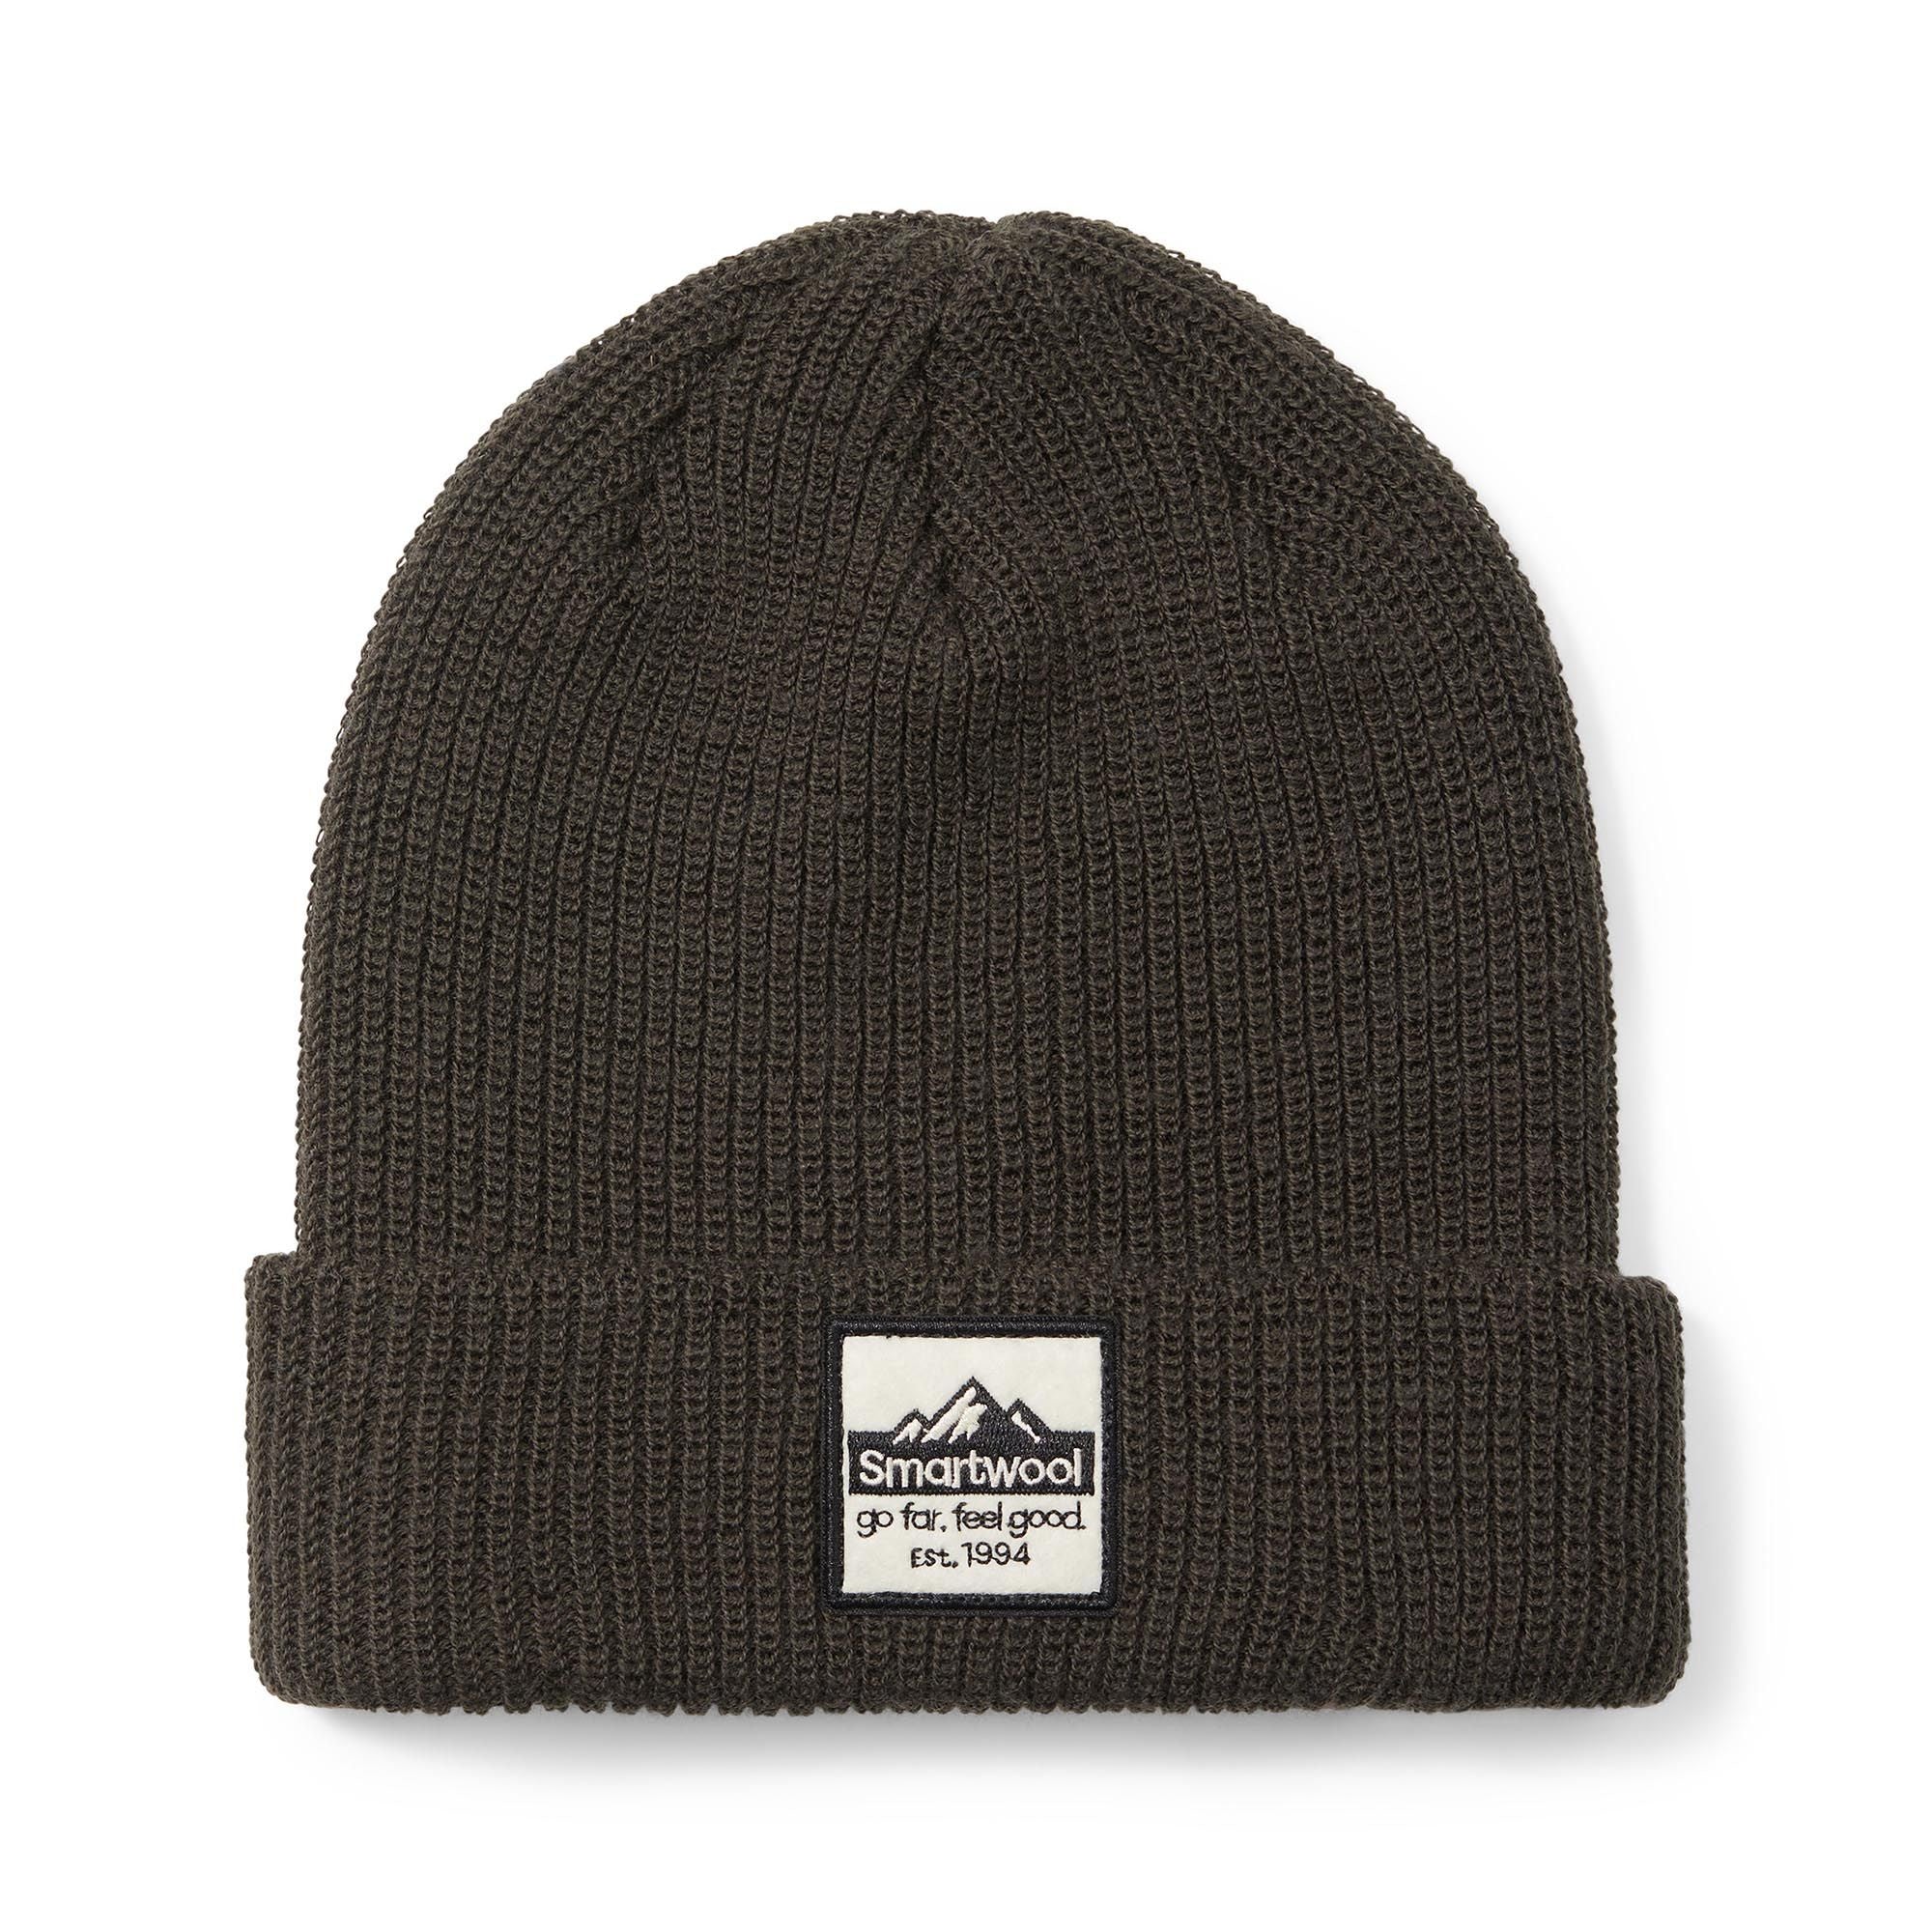 SMARTWOOL - PATCH BEANIE IN NORTH WOODS